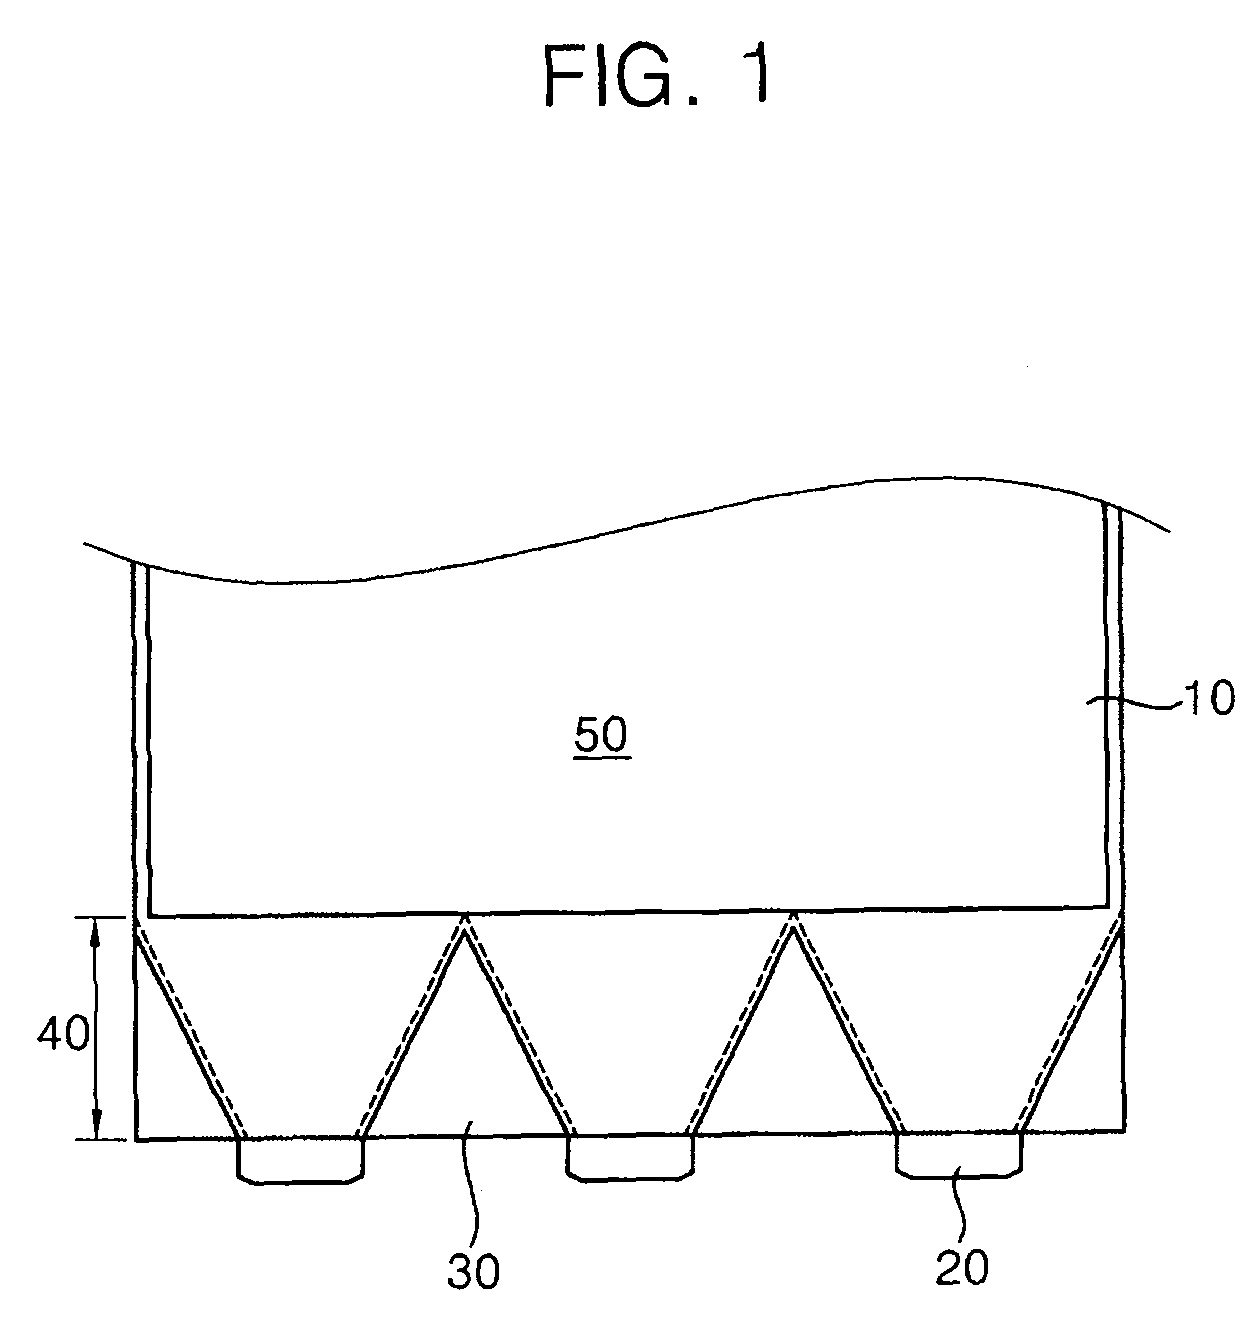 Liquid crystal display using different light radiation angles of light emitting diodes